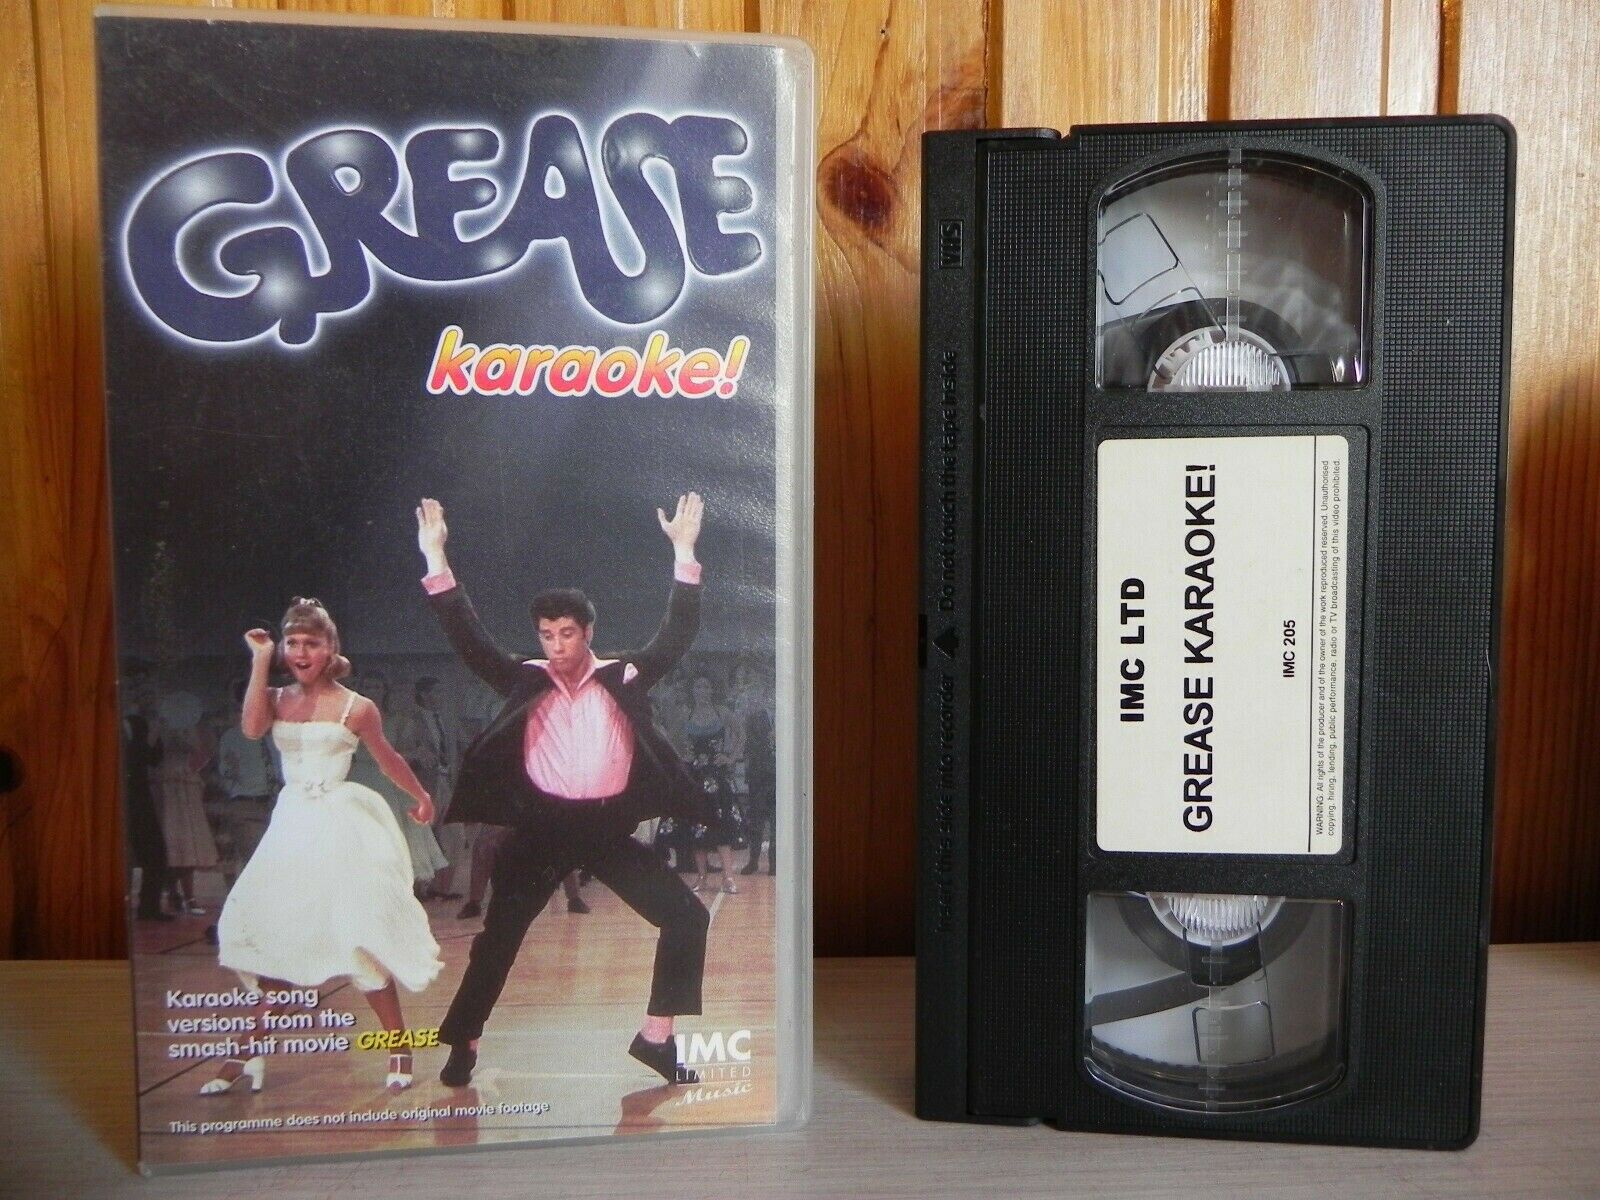 Grease - Karaoke Song Version From The Smash Hit Movie - Grease - Music - VHS-